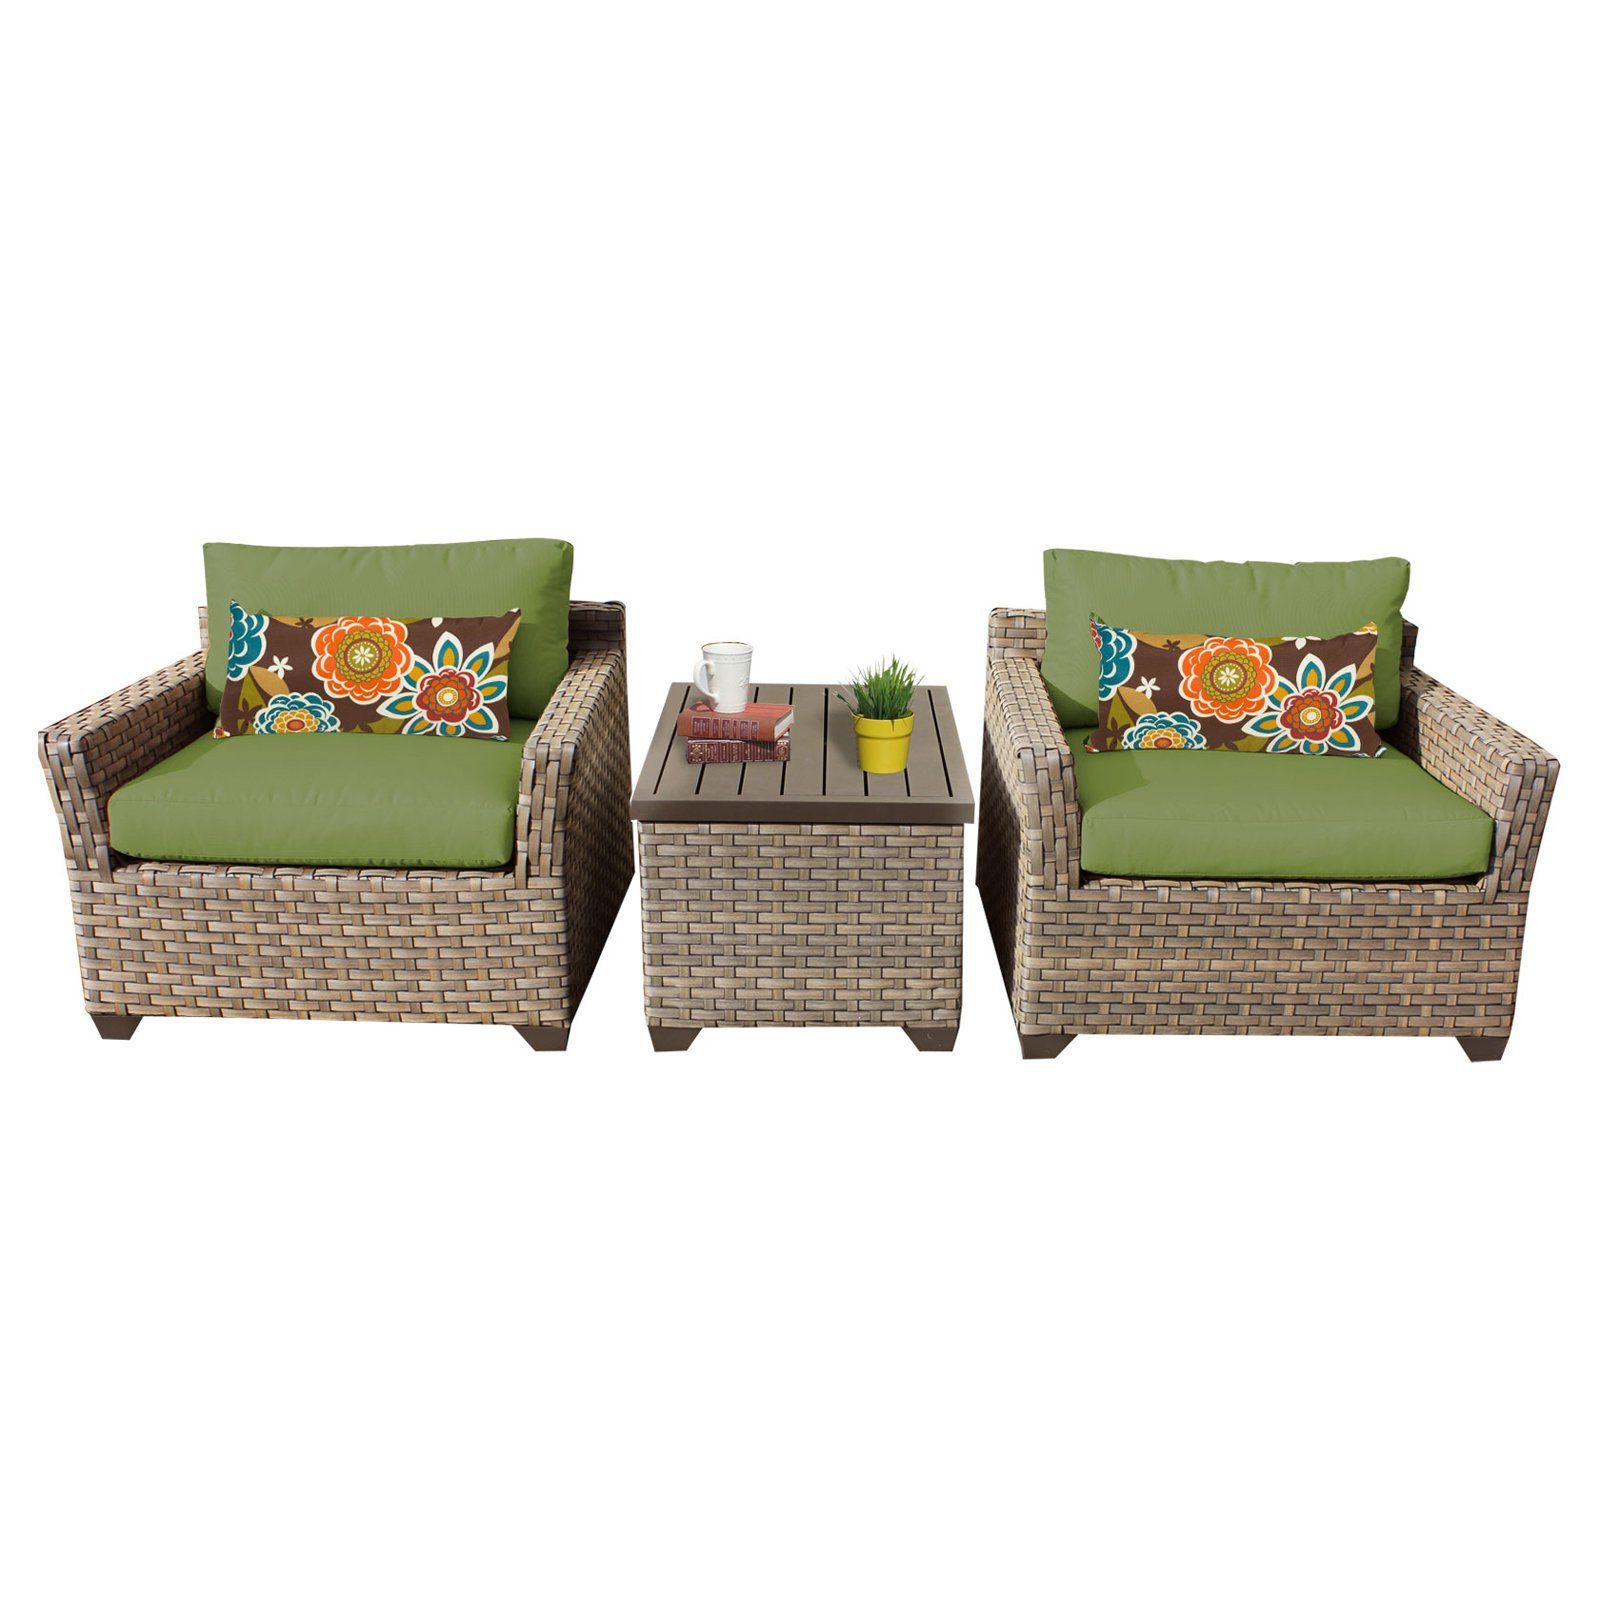 Outdoor Tk Classics Monterey Wicker 3 Piece Patio Conversation Set With Pertaining To Latest Wicker Beige Cushion Outdoor Patio Sets (View 8 of 15)